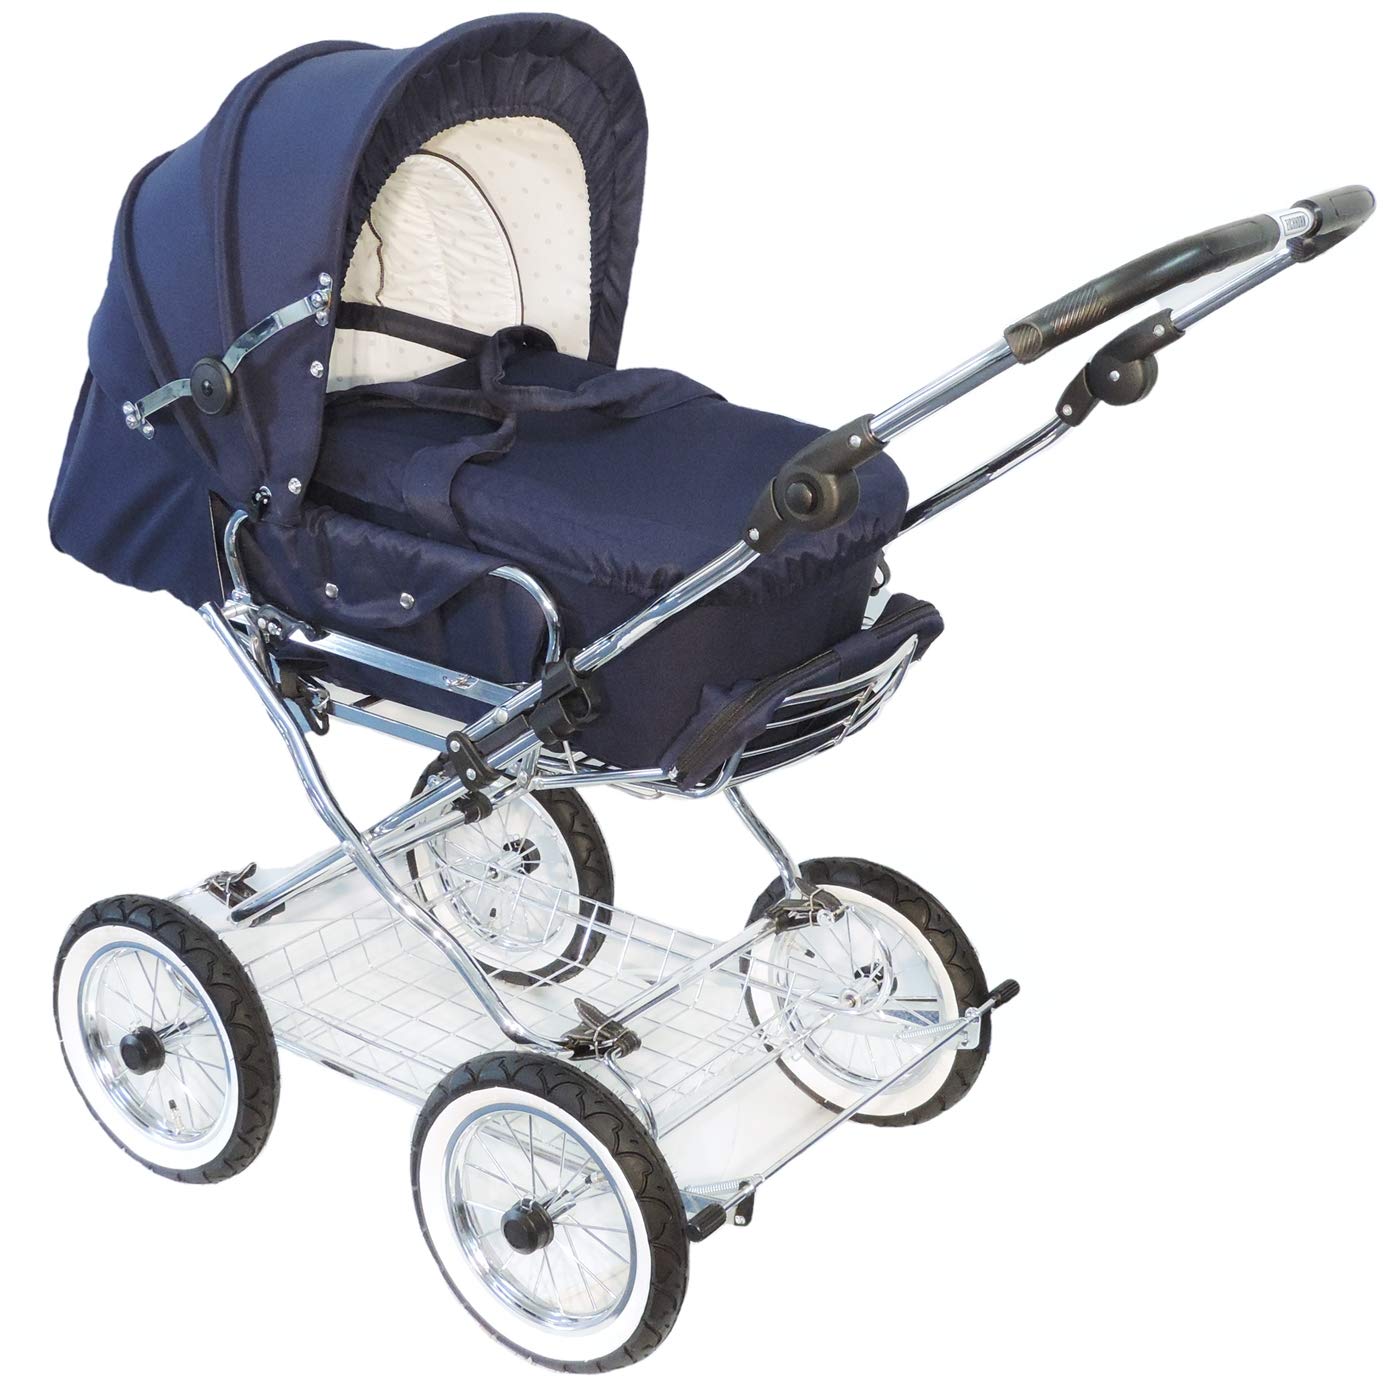 Eichhorn Combination Pushchair with Leather Strap Frame with Slide Height Adjustment with Fixed Carry Bag LuxVersion Pneumatic Tyre